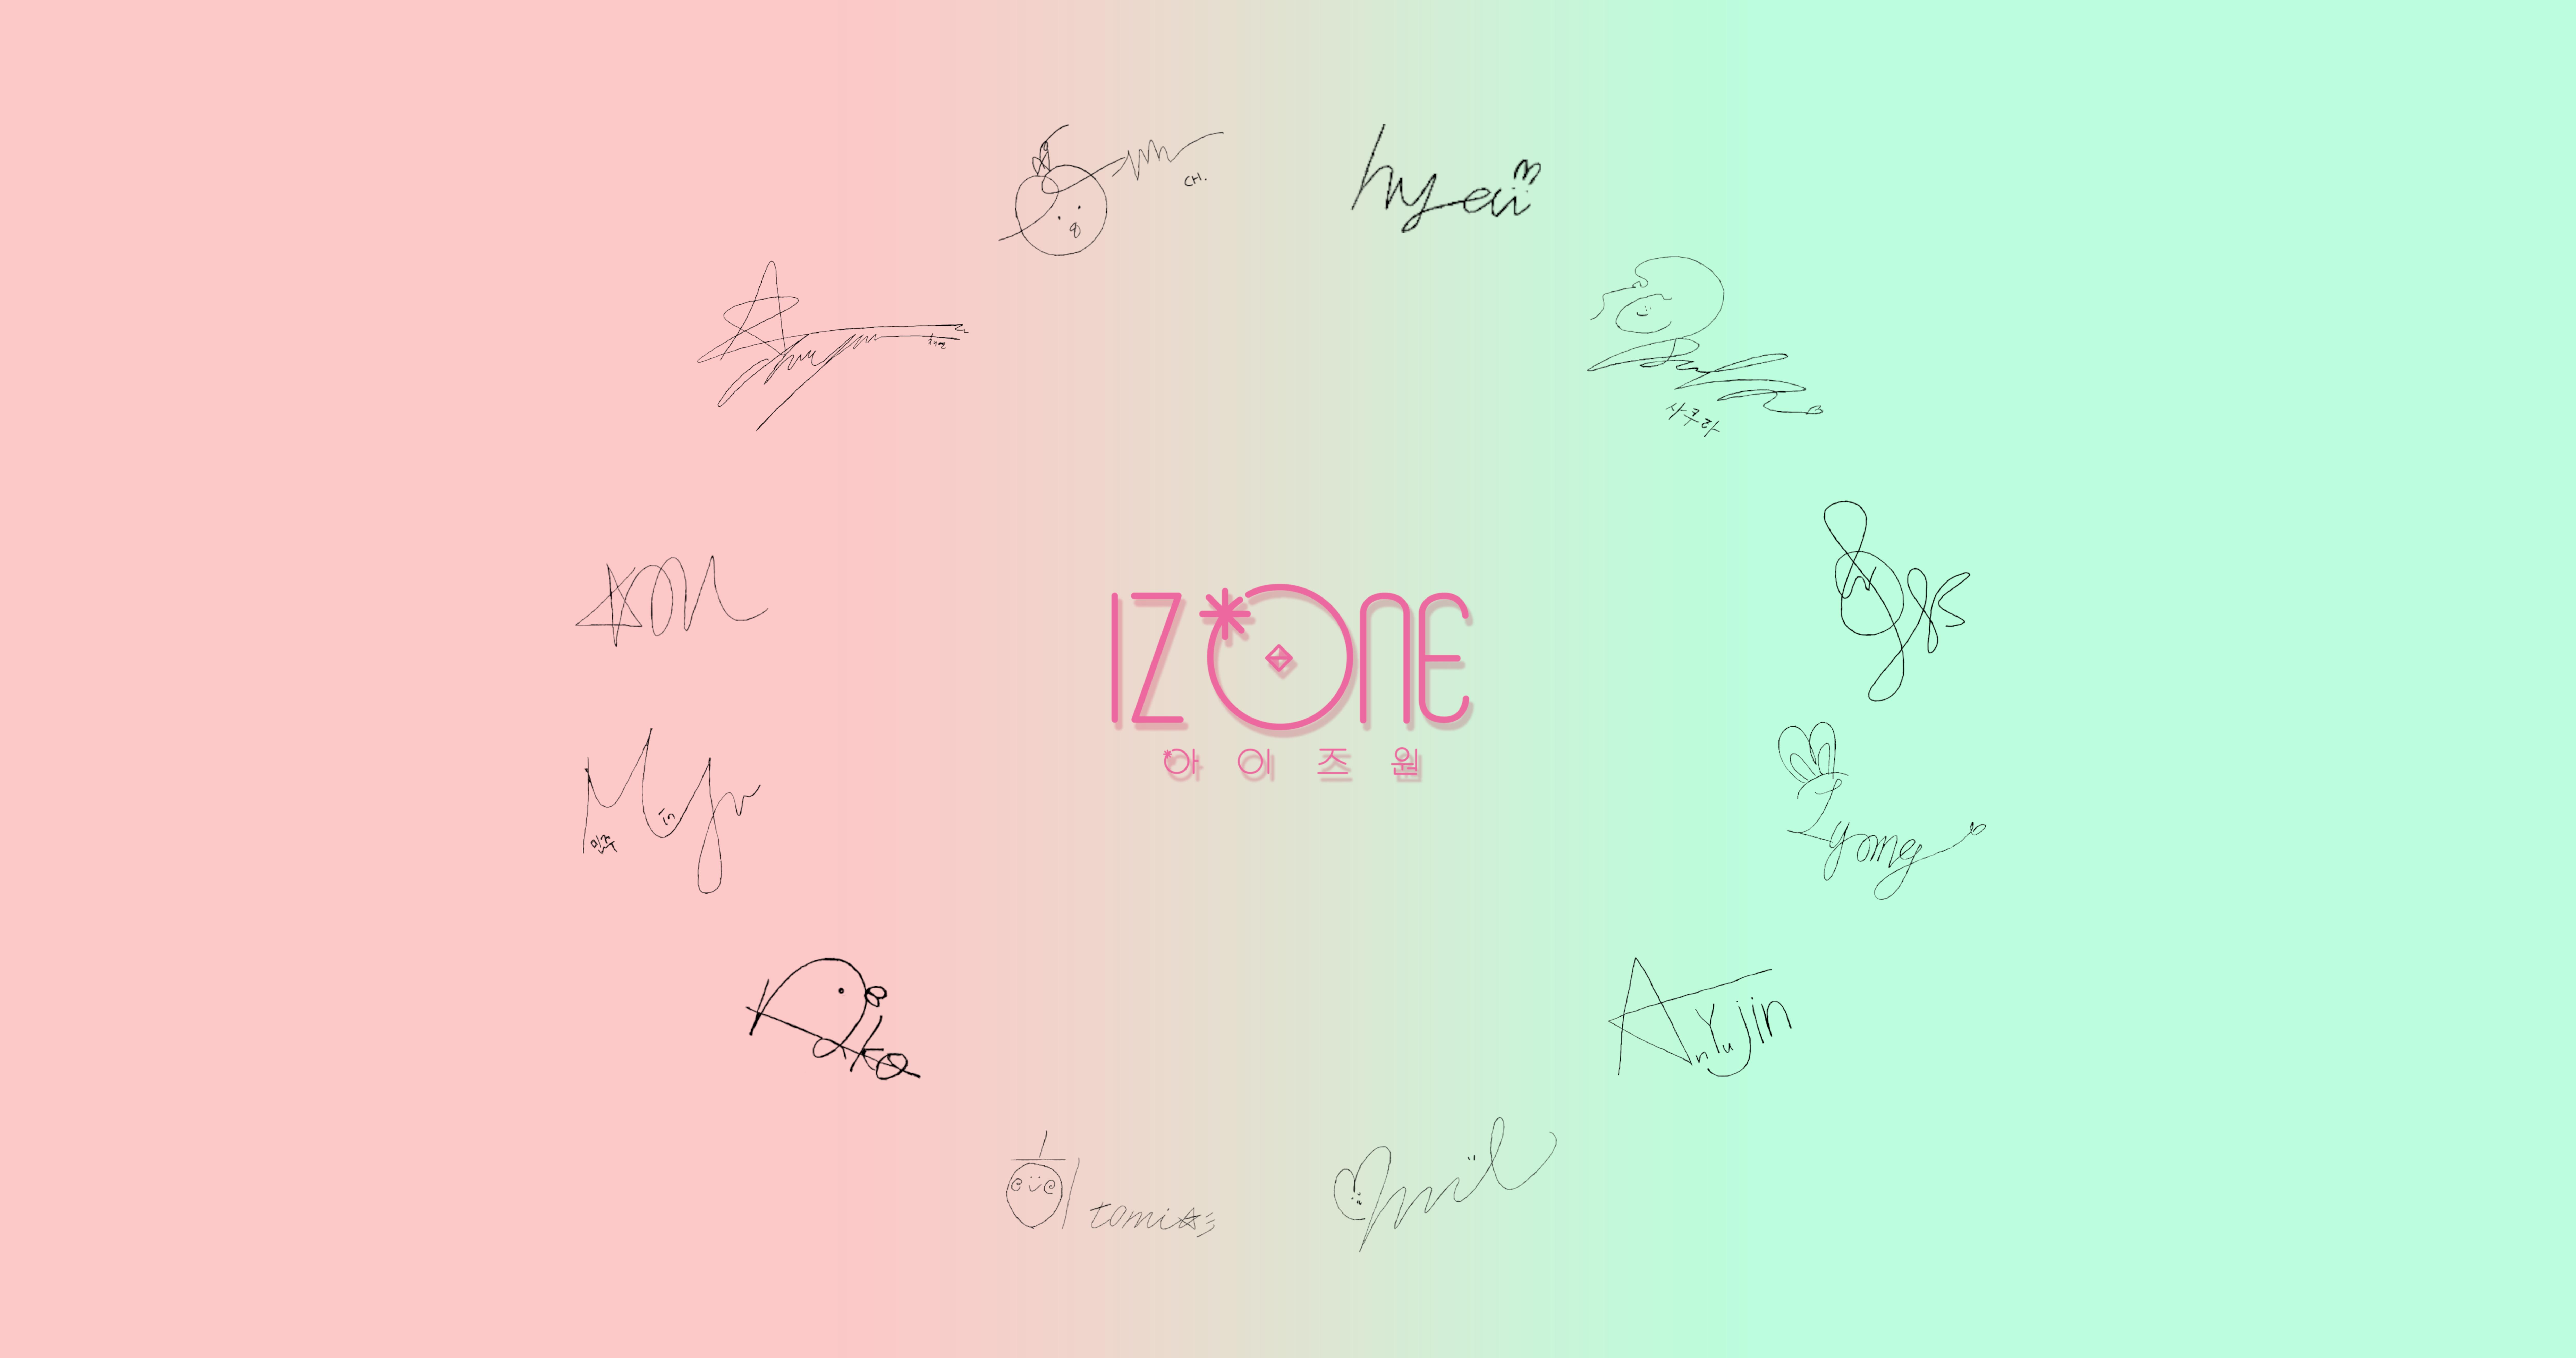 IZ*ONE wallpaper with all members signature